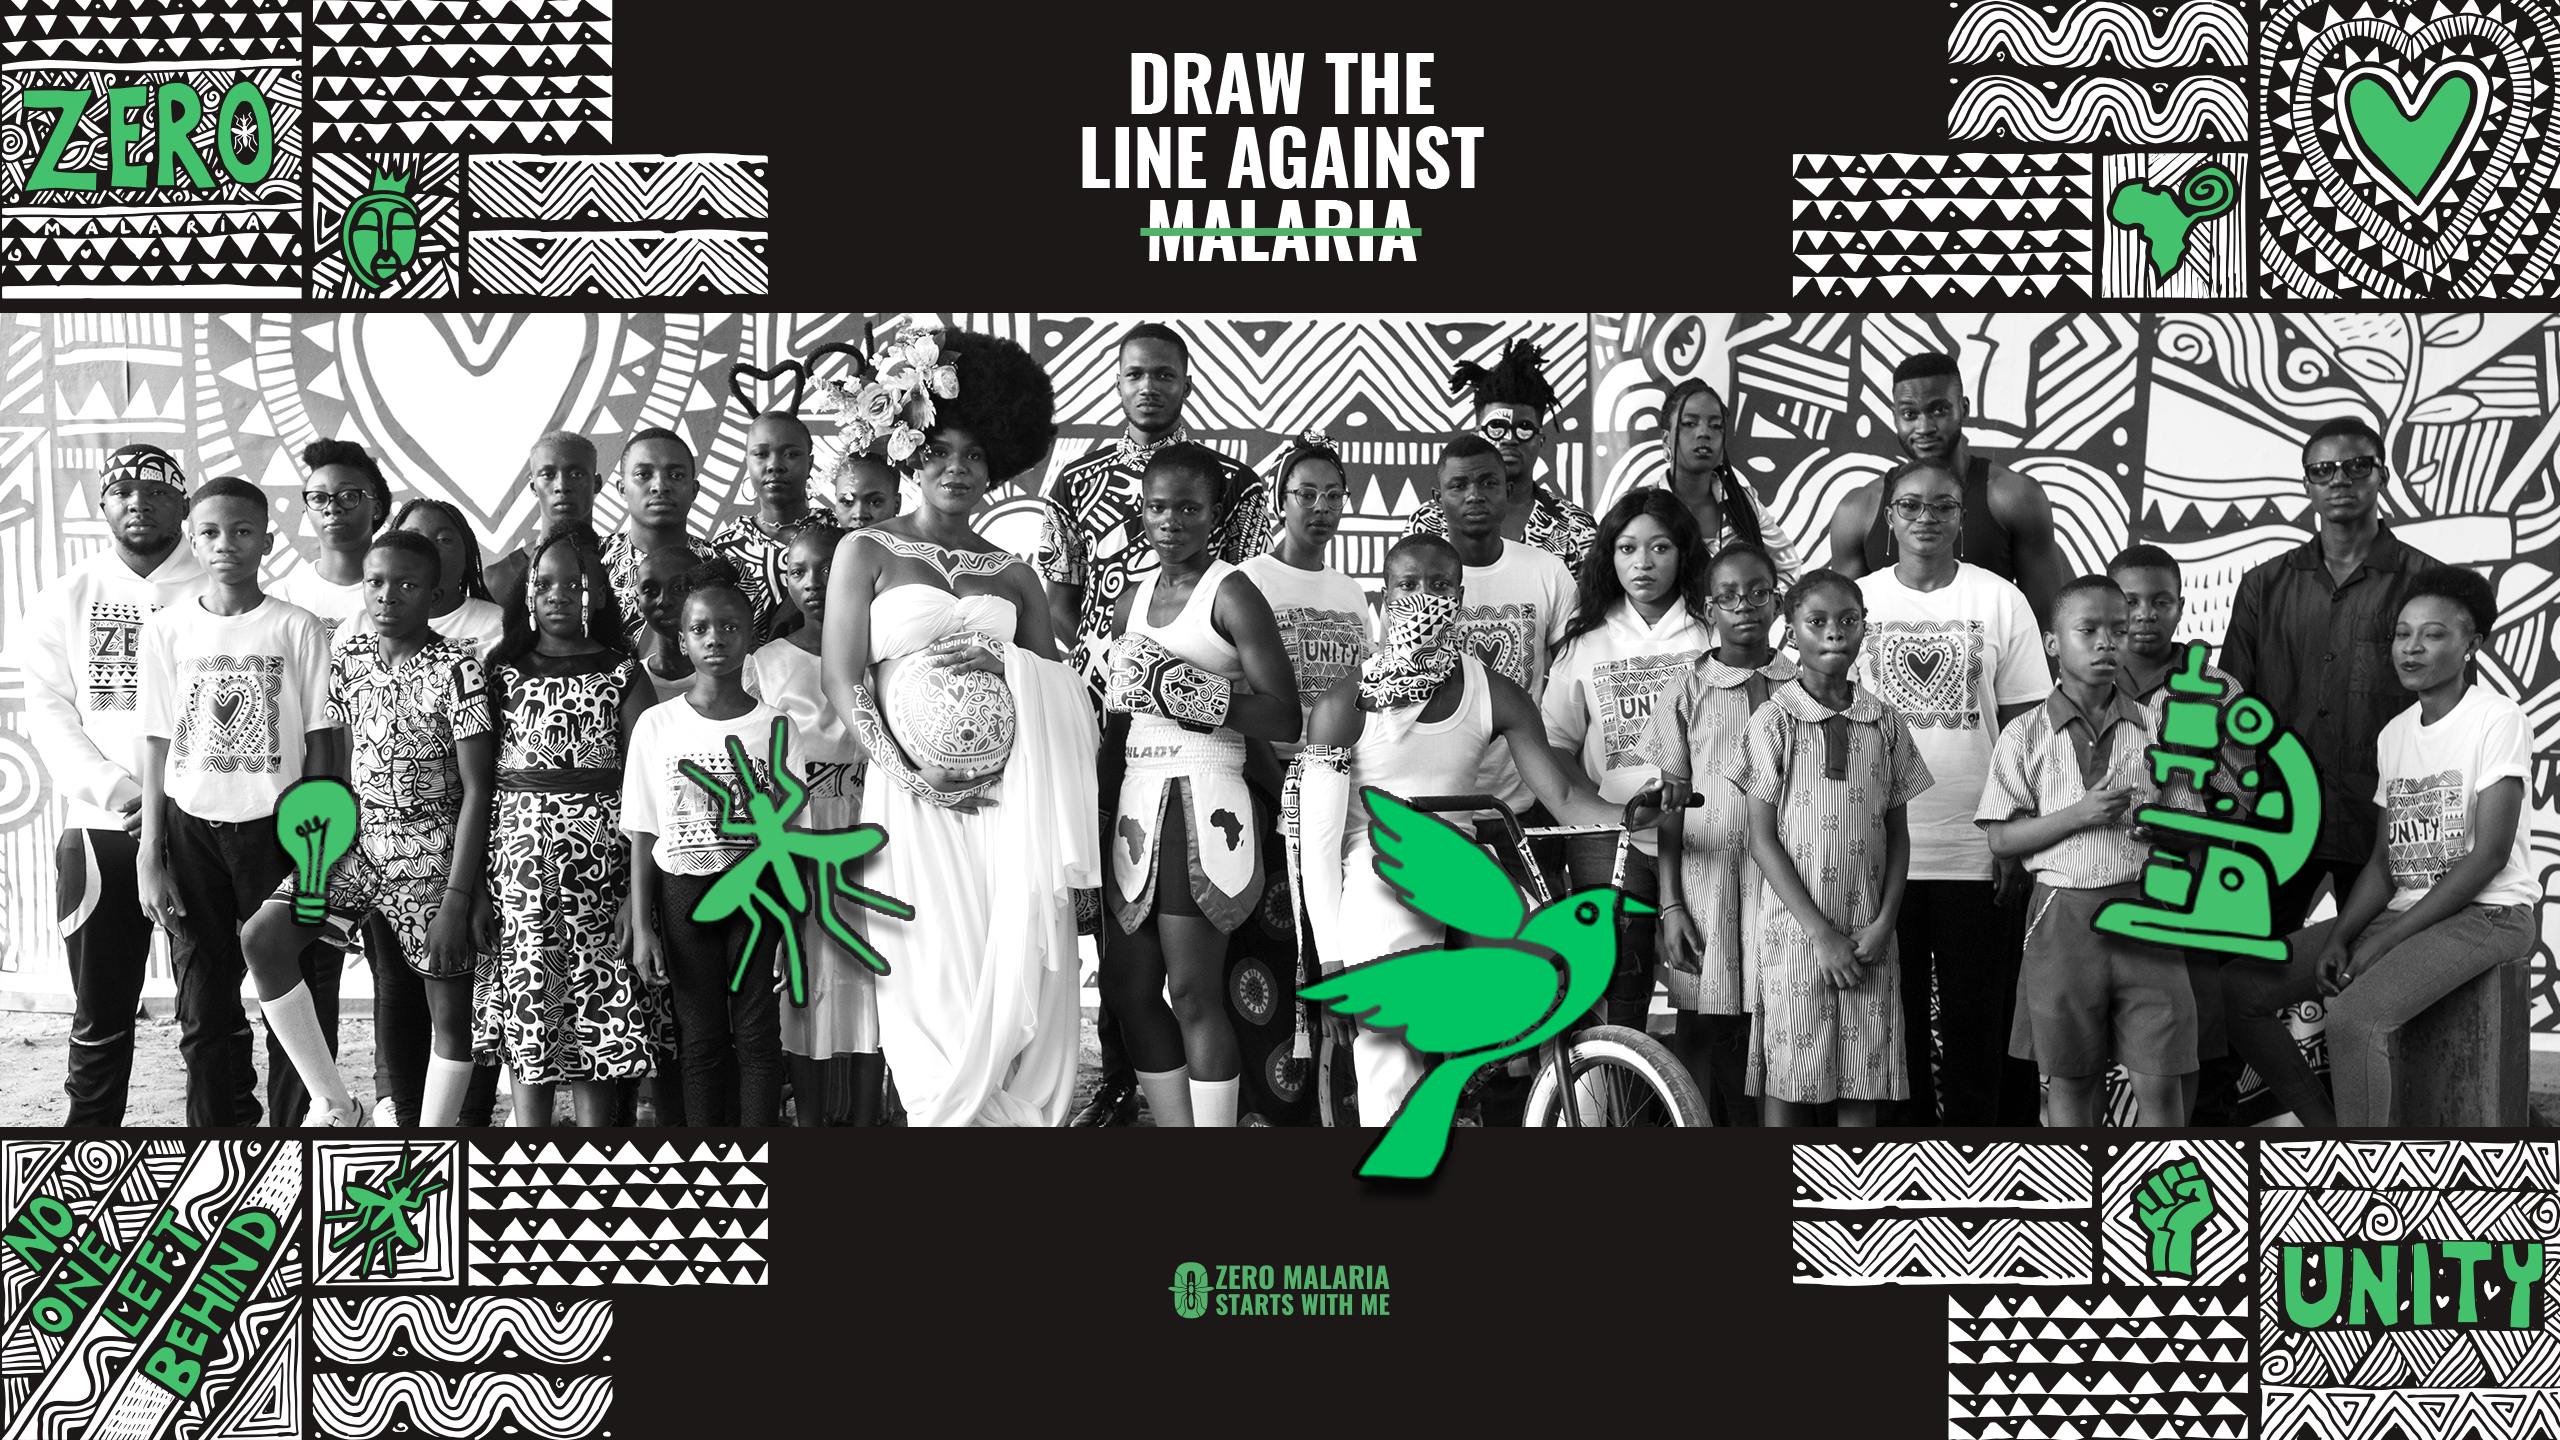 African stars unite youth to "Draw The Line" against malaria and take back their futures